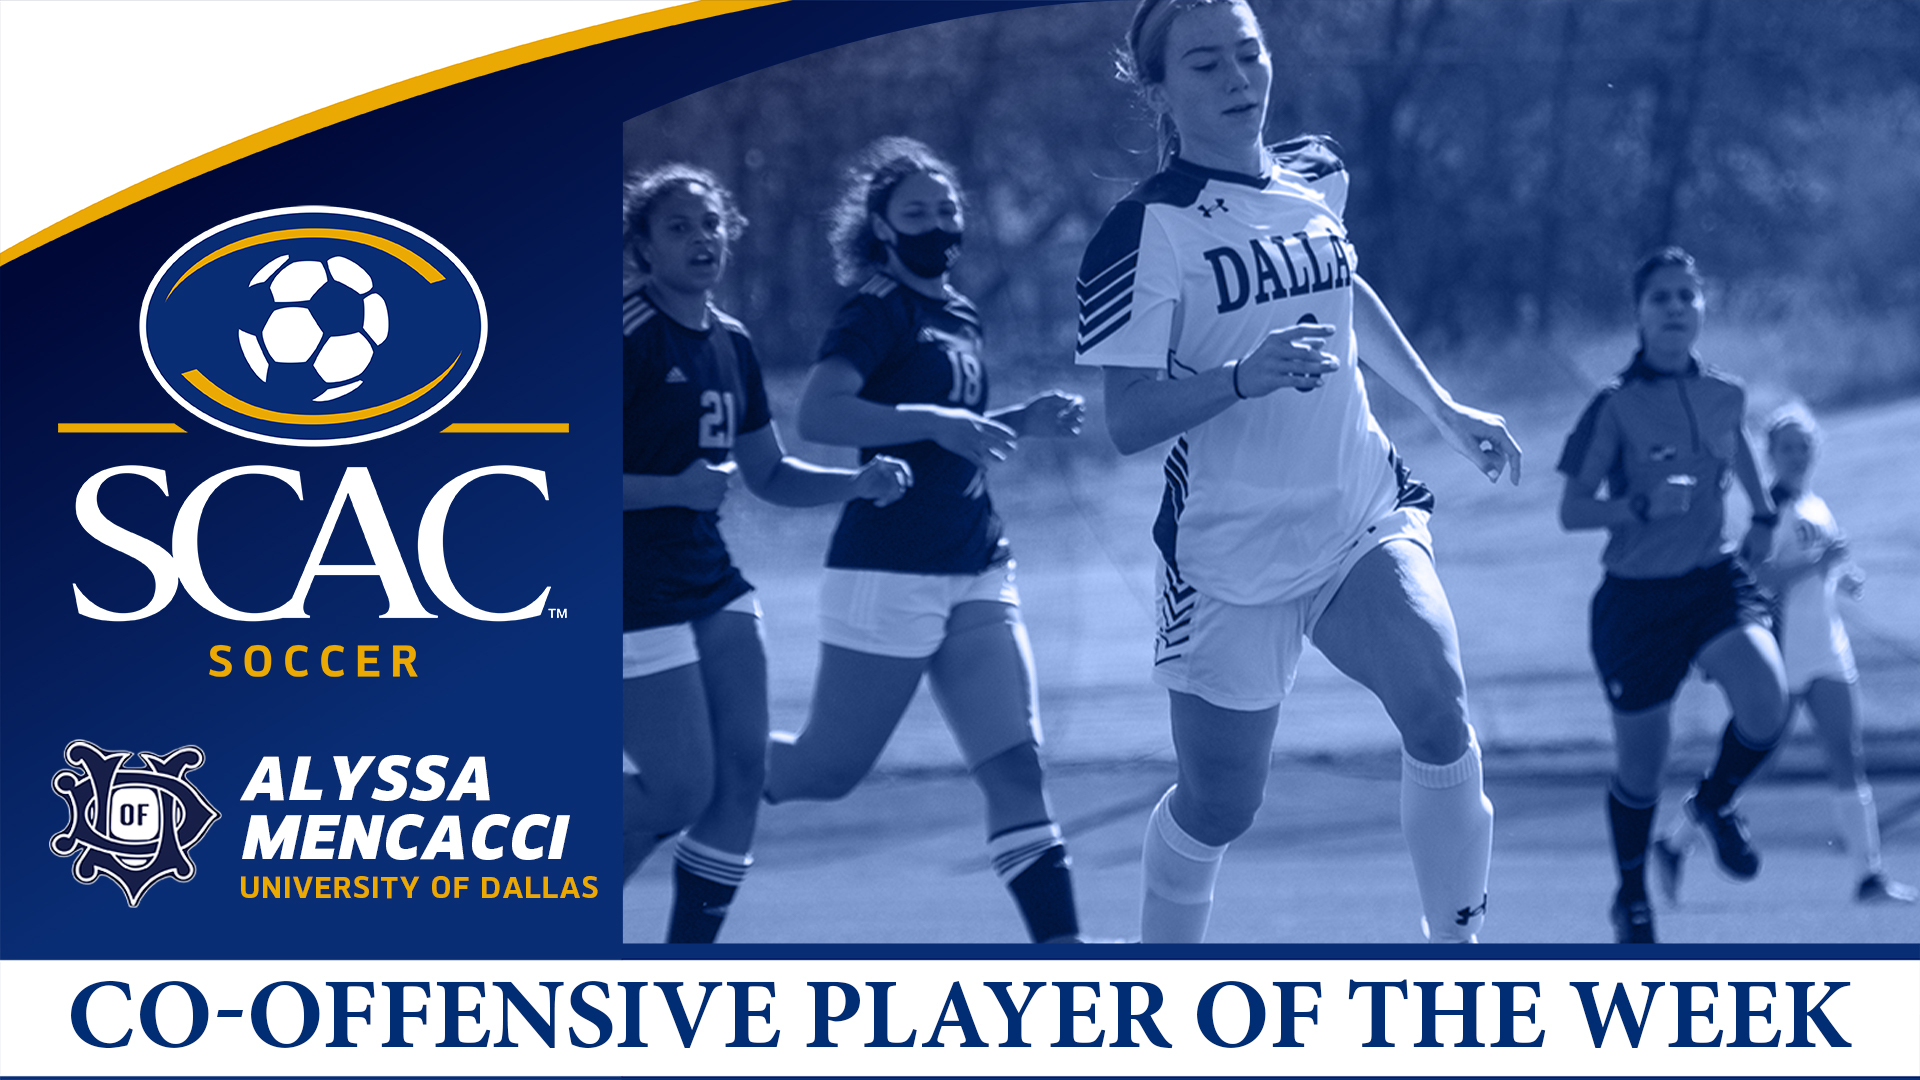 Mencacci Captures SCAC Women's Soccer Co-Offensive Player of the Week (Interview Updated)